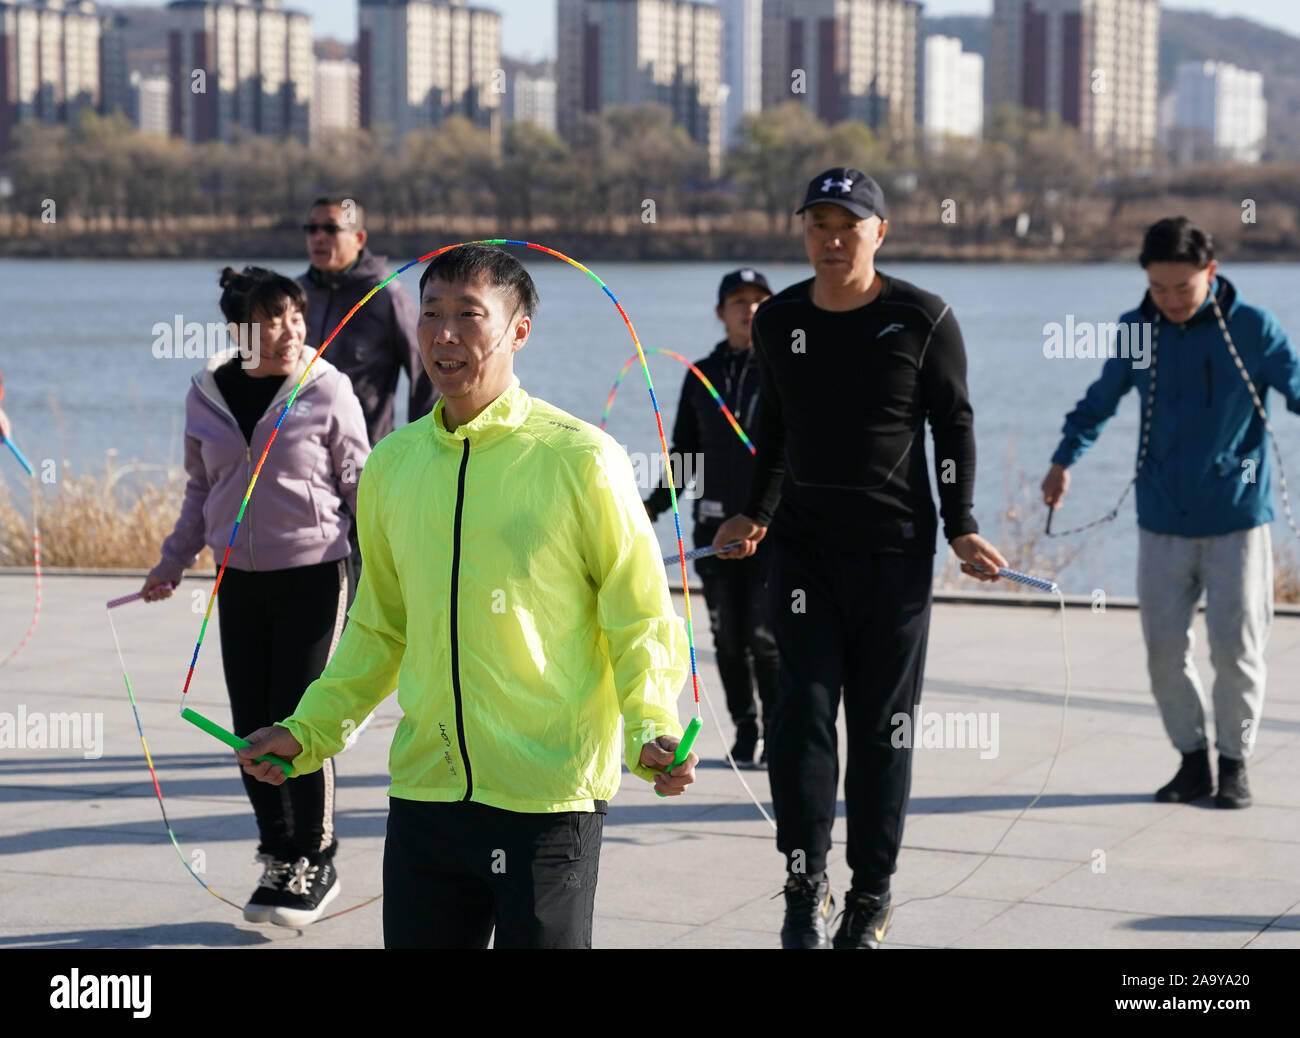 (191118) -- BEIJING, Nov. 18, 2019 (Xinhua) -- Hou Weidong (front) practises with his students at a square in Jilin City, northeast China's Jilin Province, Nov. 5, 2019. Hou Weidong, 41 years old, is a national coach who specializes in rope jumping skills. Meanwhile, he also is a professional athlete of rope jumping. In the beginning, rope jumping was just his daily fitness routine in the park. Gradually, his astonishing performance attracted lots of people to learn from him, so he embarked on a coaching road. In 2014, he and his students began to attend national rope jumping competitions and Stock Photo